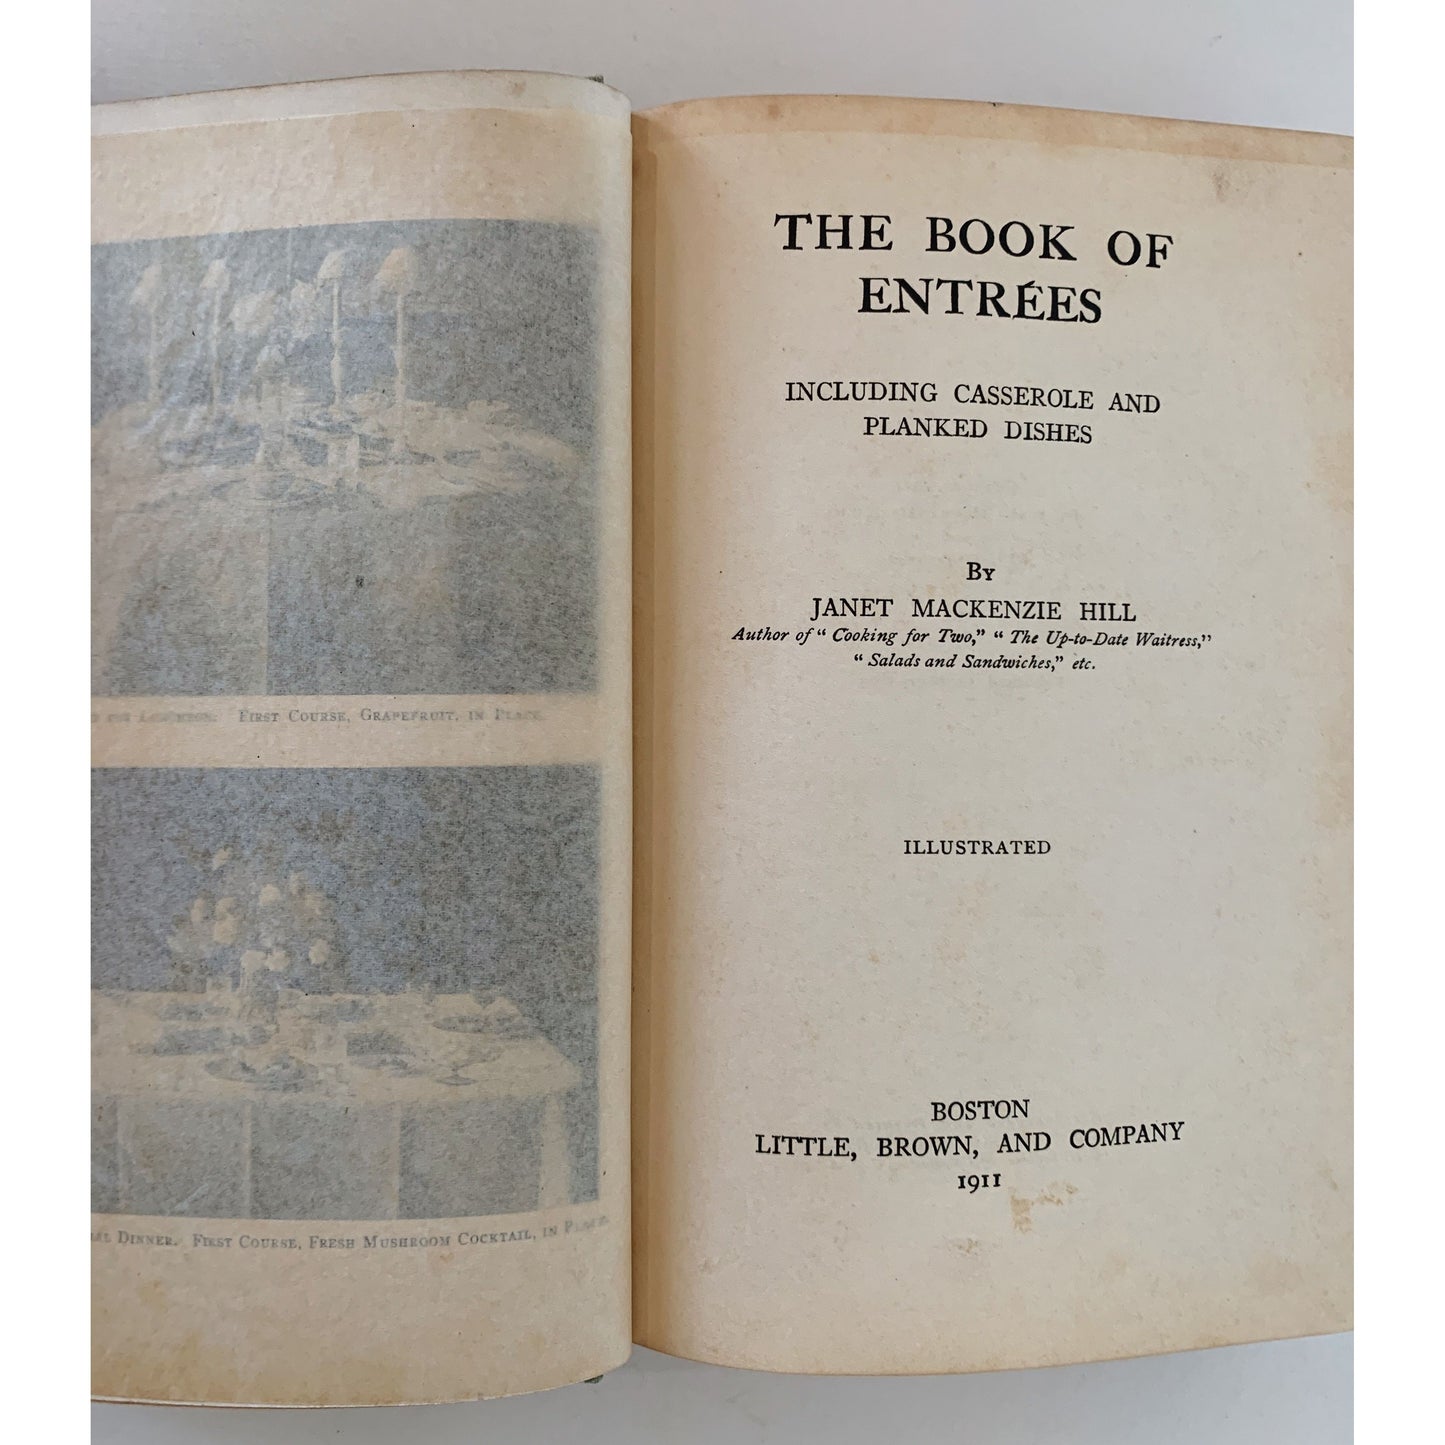 The Book of Entrees, Janet M. Hill, 1911 Cookbook